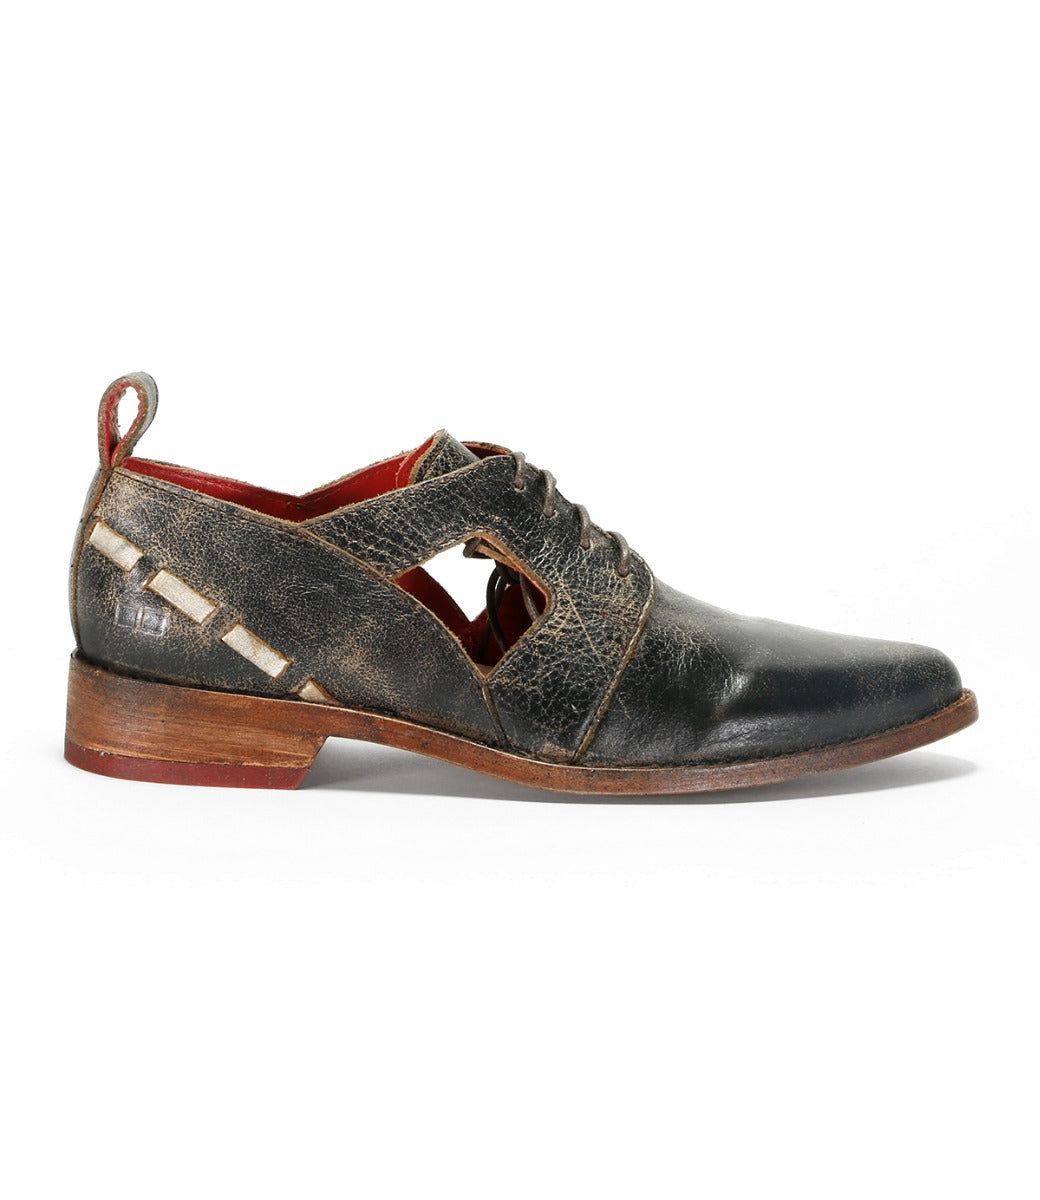 A pair of Bed Stu Neftis women's shoes with a leather sole.